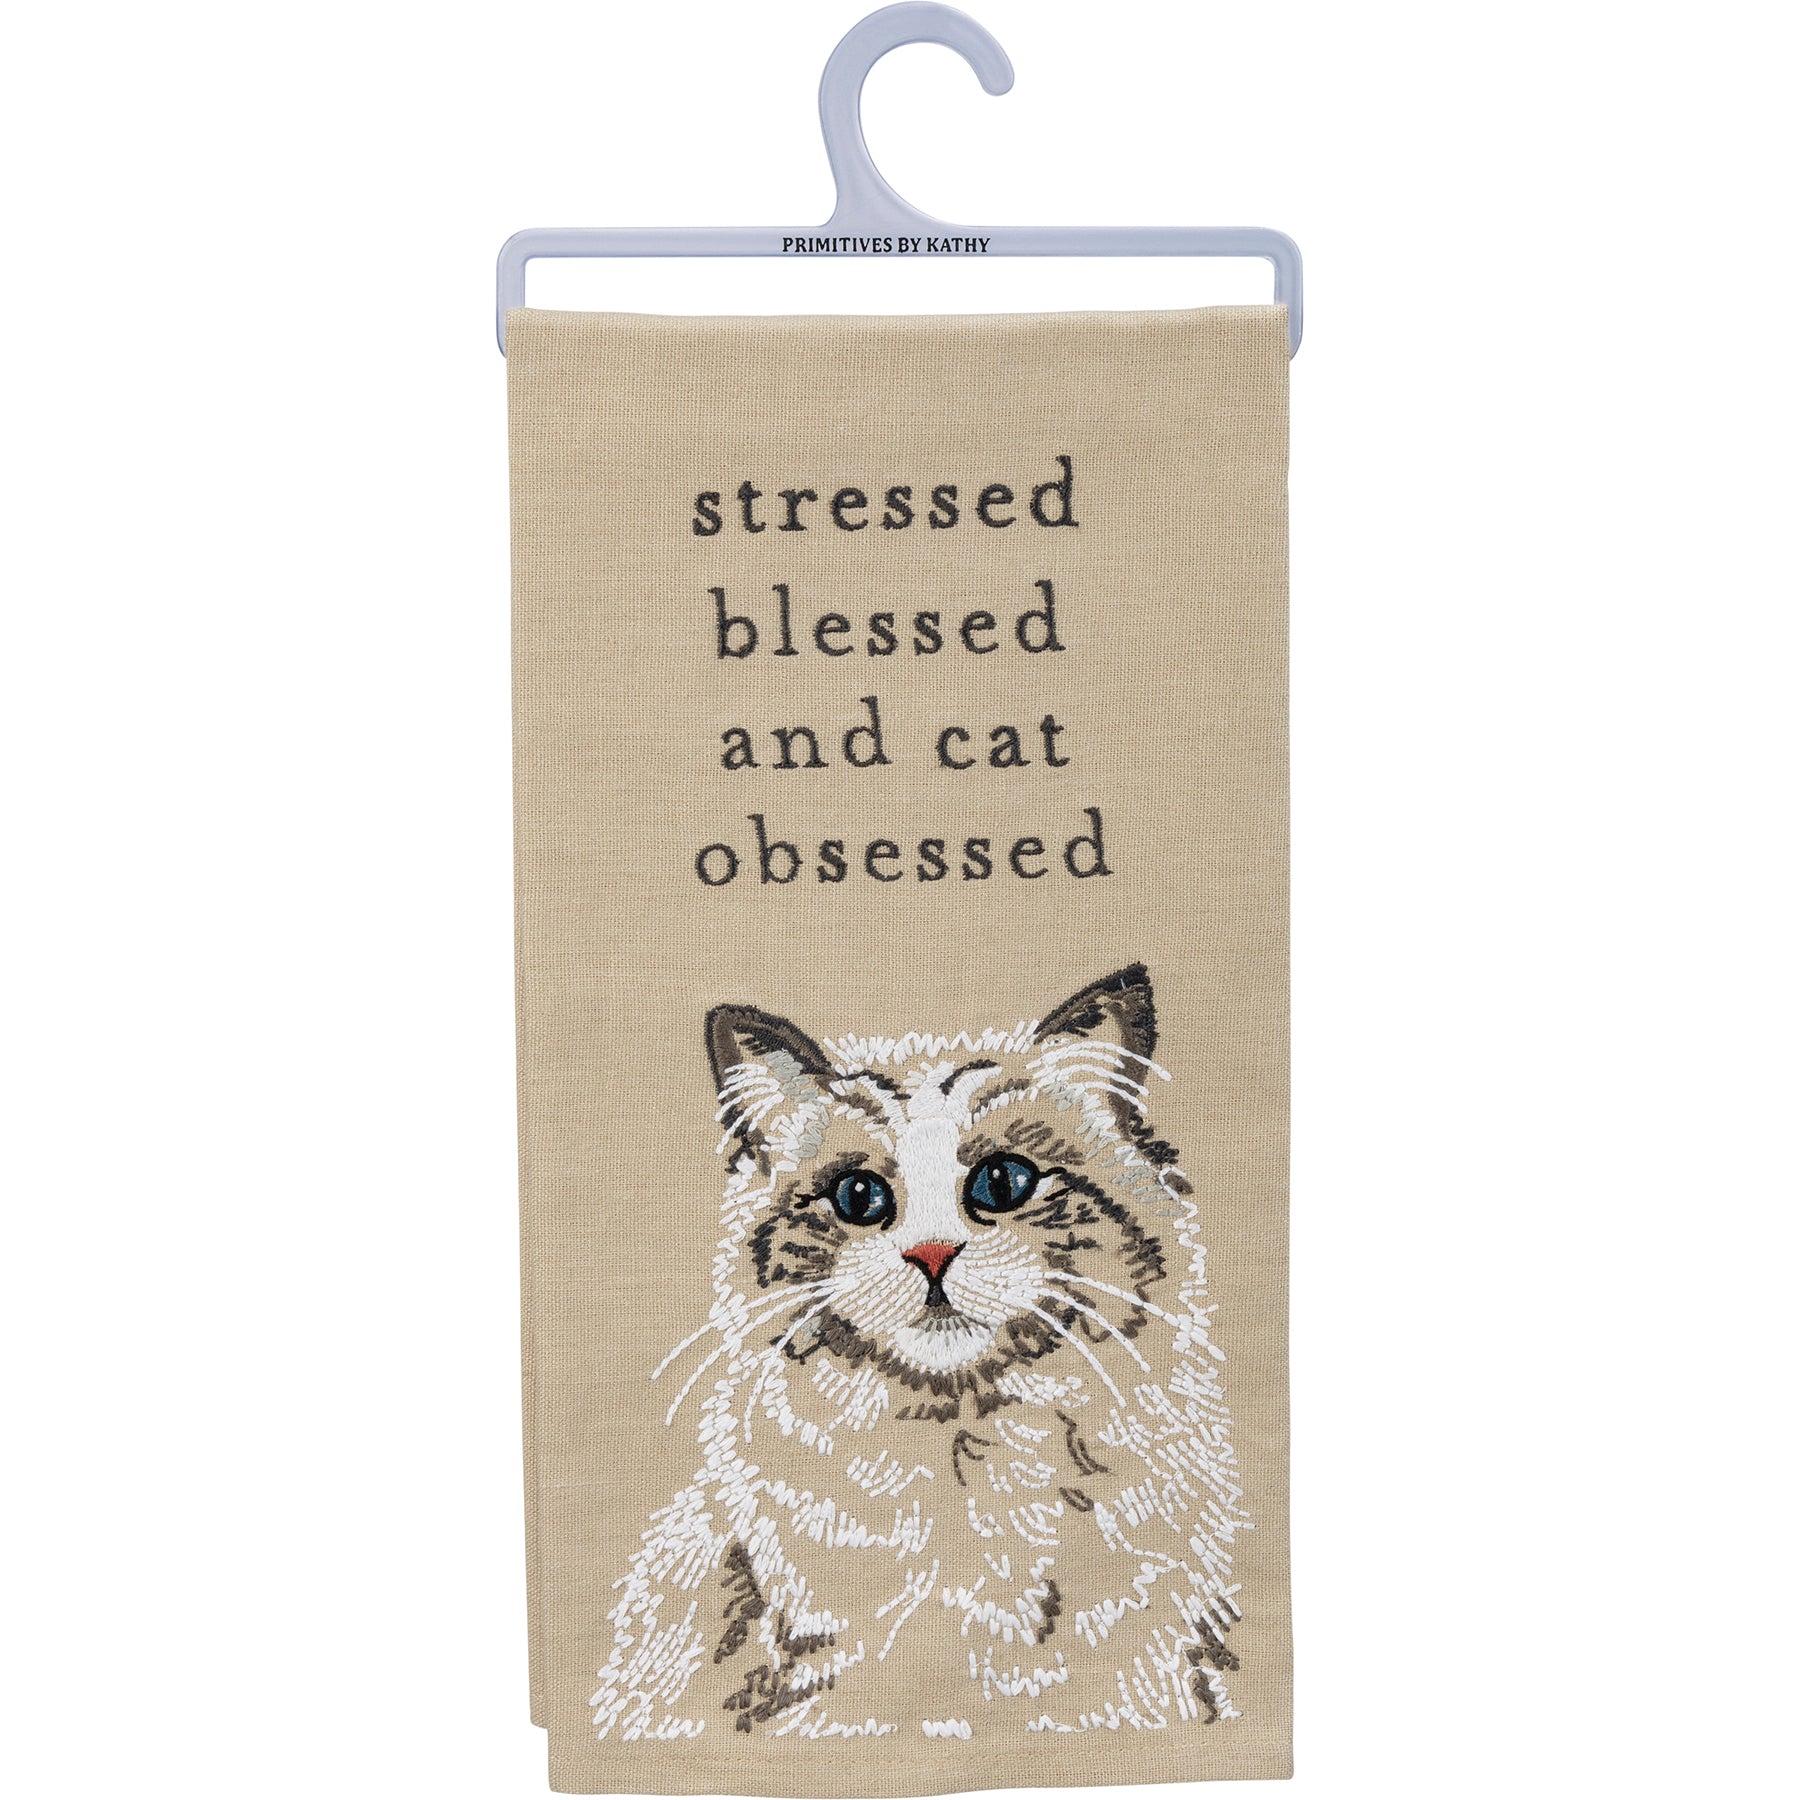 Stressed Blessed And Cat Obsessed Dish Cloth Towel | Novelty Silly Tea Towels | Cute Hilarious Kitchen Hand Towel | 20" x 26"